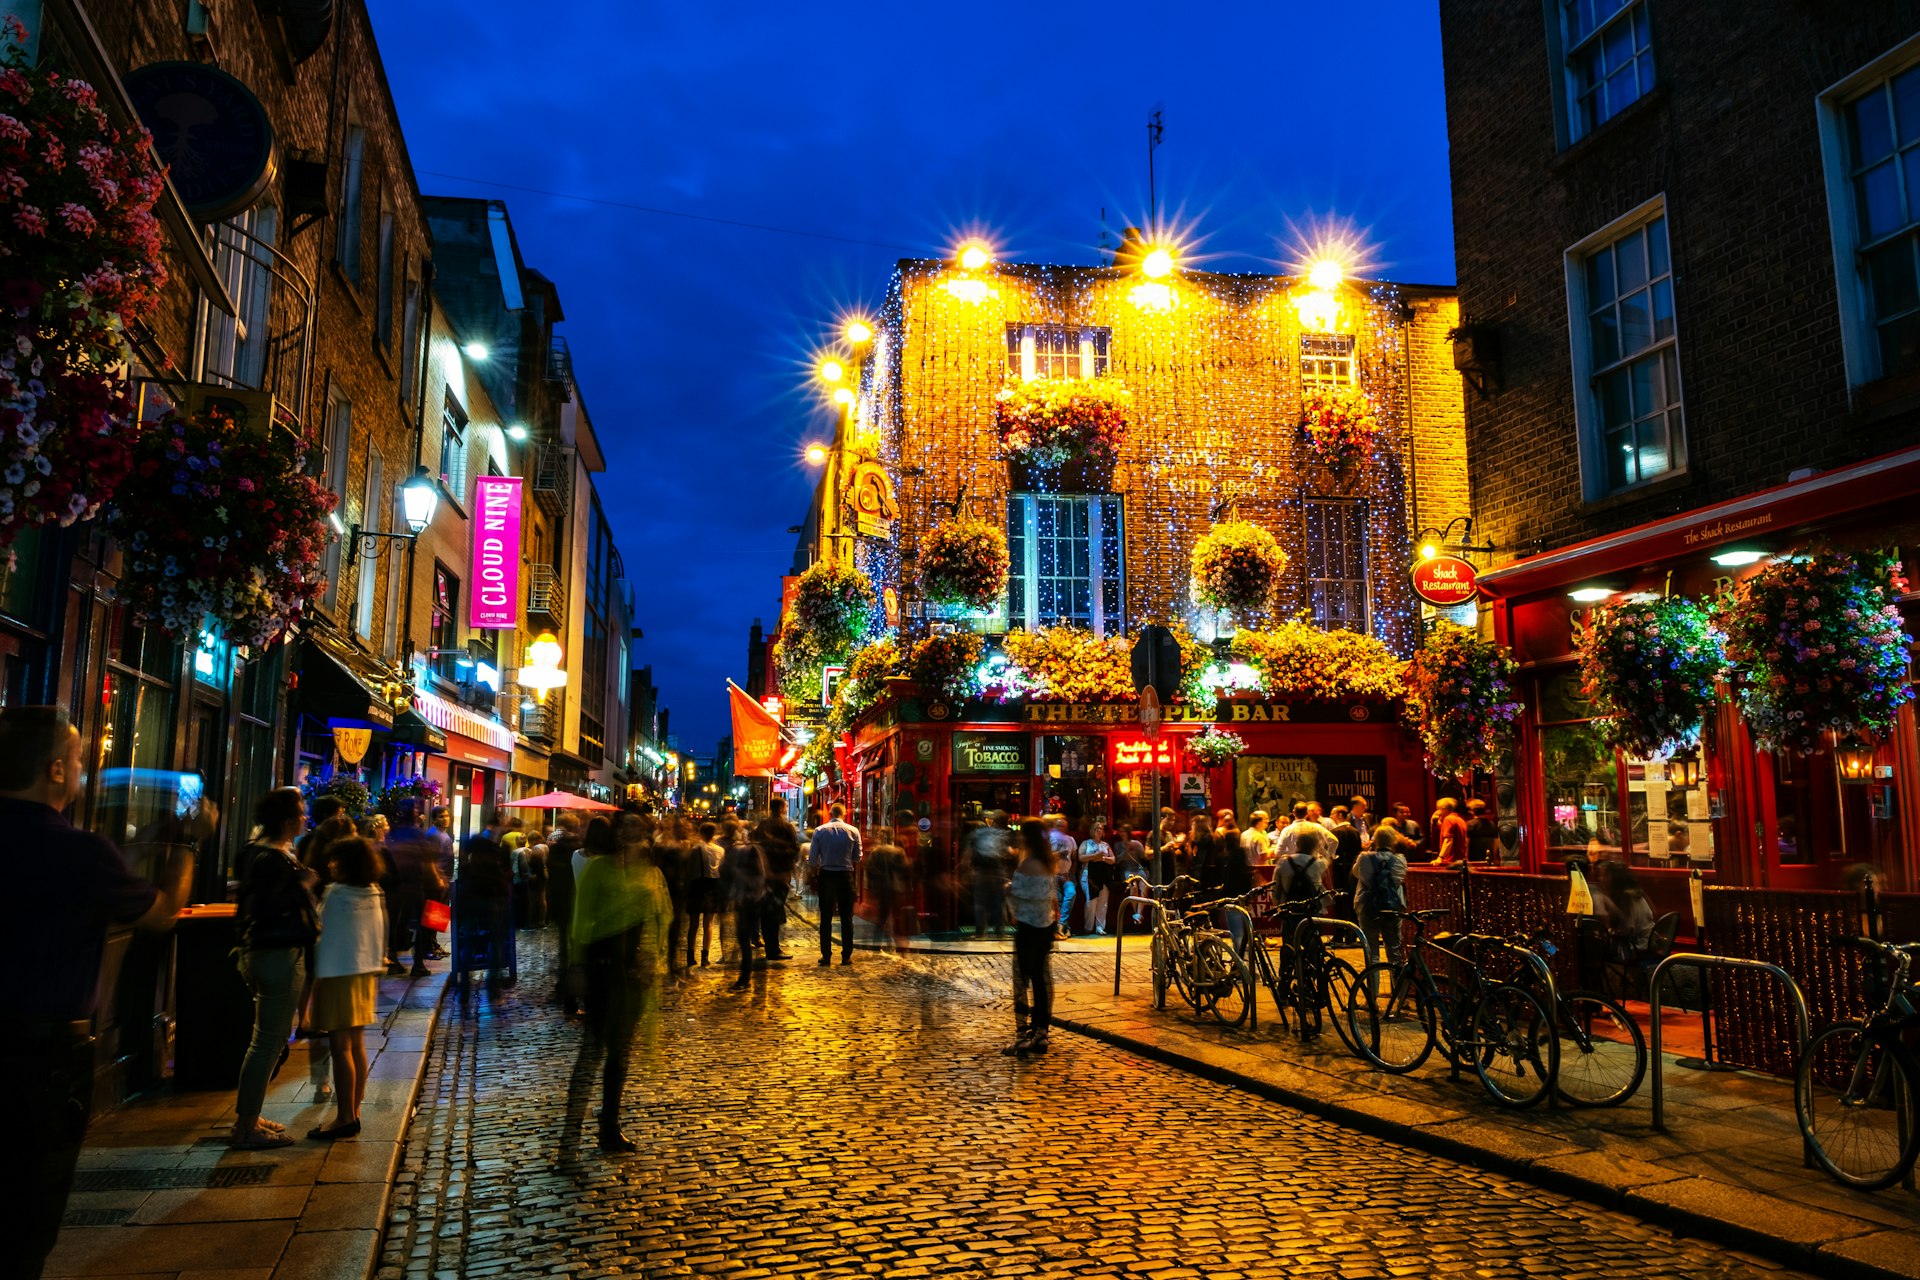 People enjoying nightlife on a cobbled street outside some pubs in a city